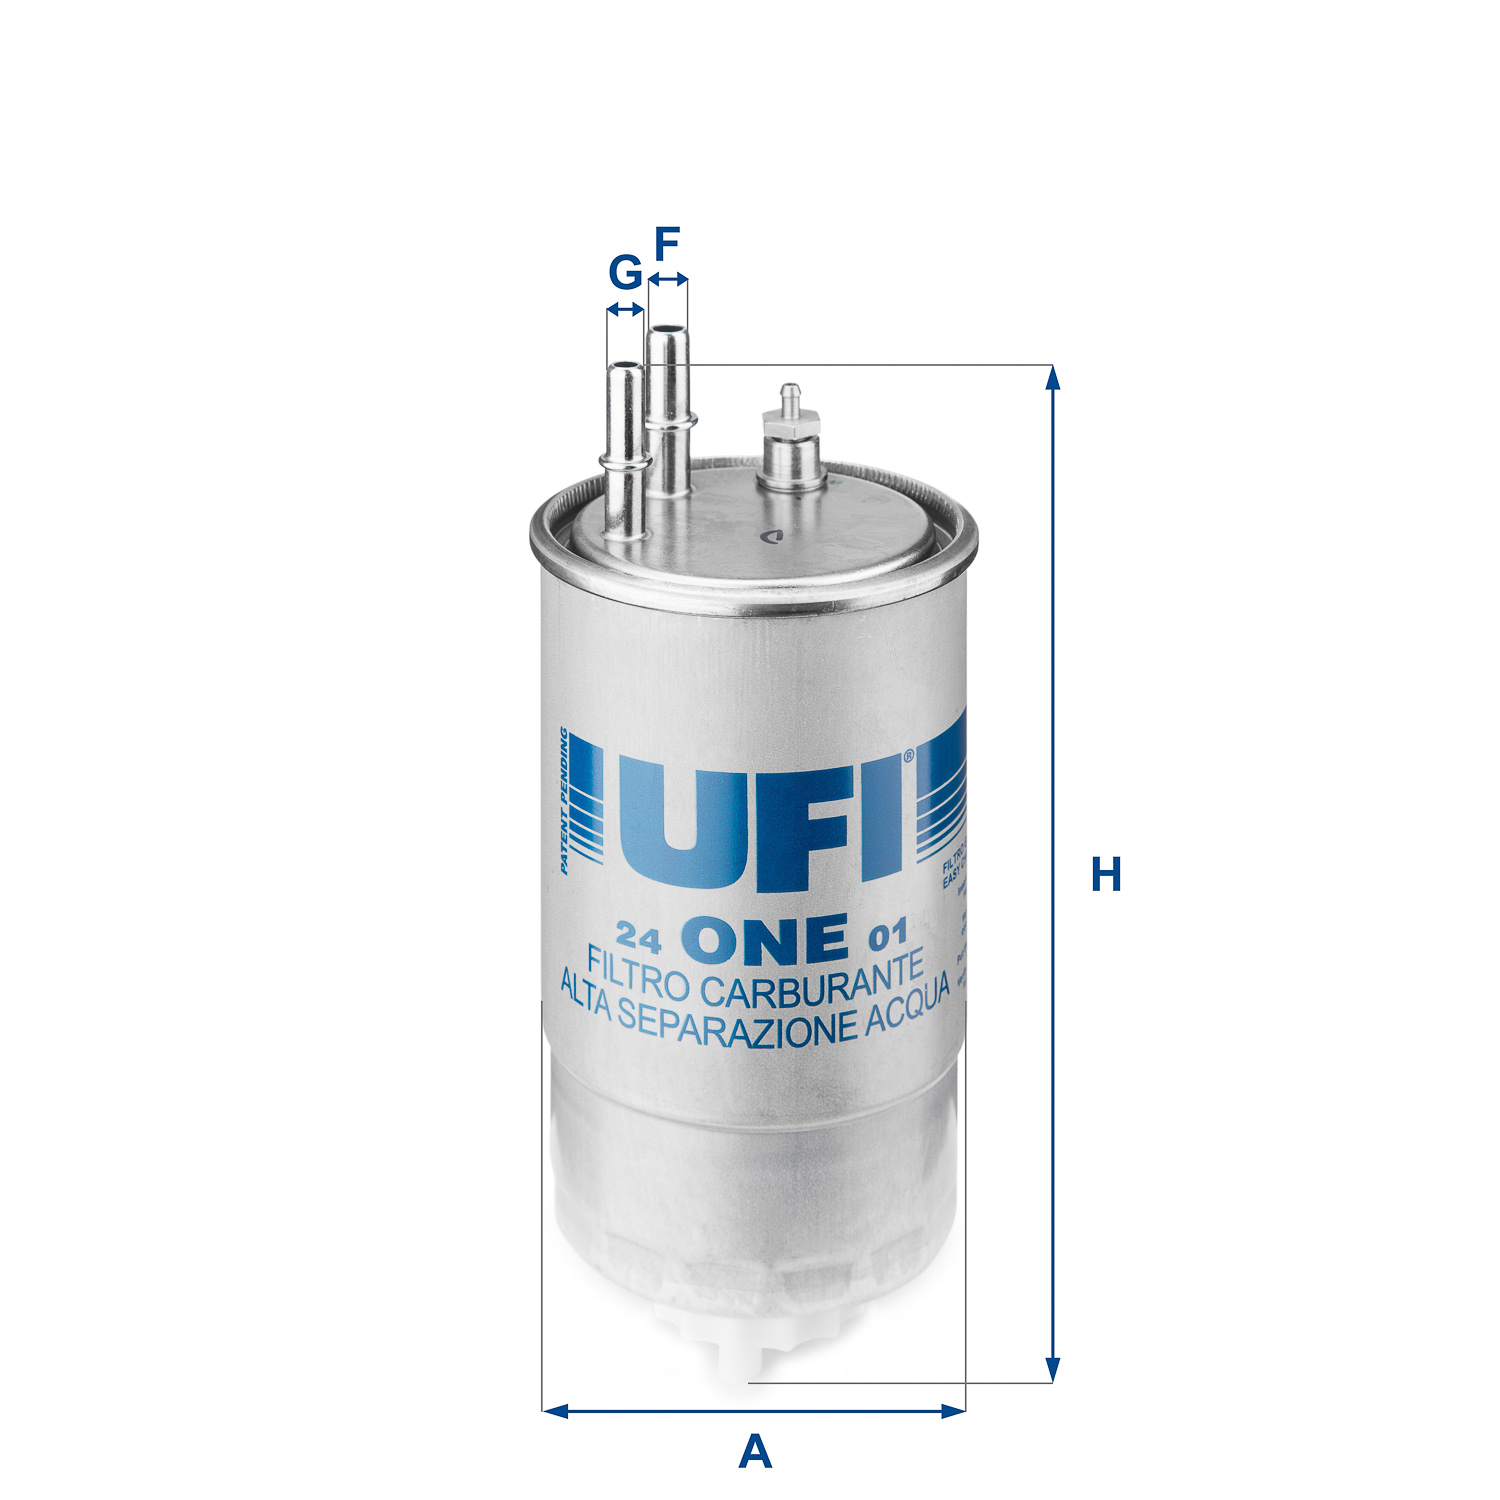 8003453061330 | Fuel filter UFI 24.one.01